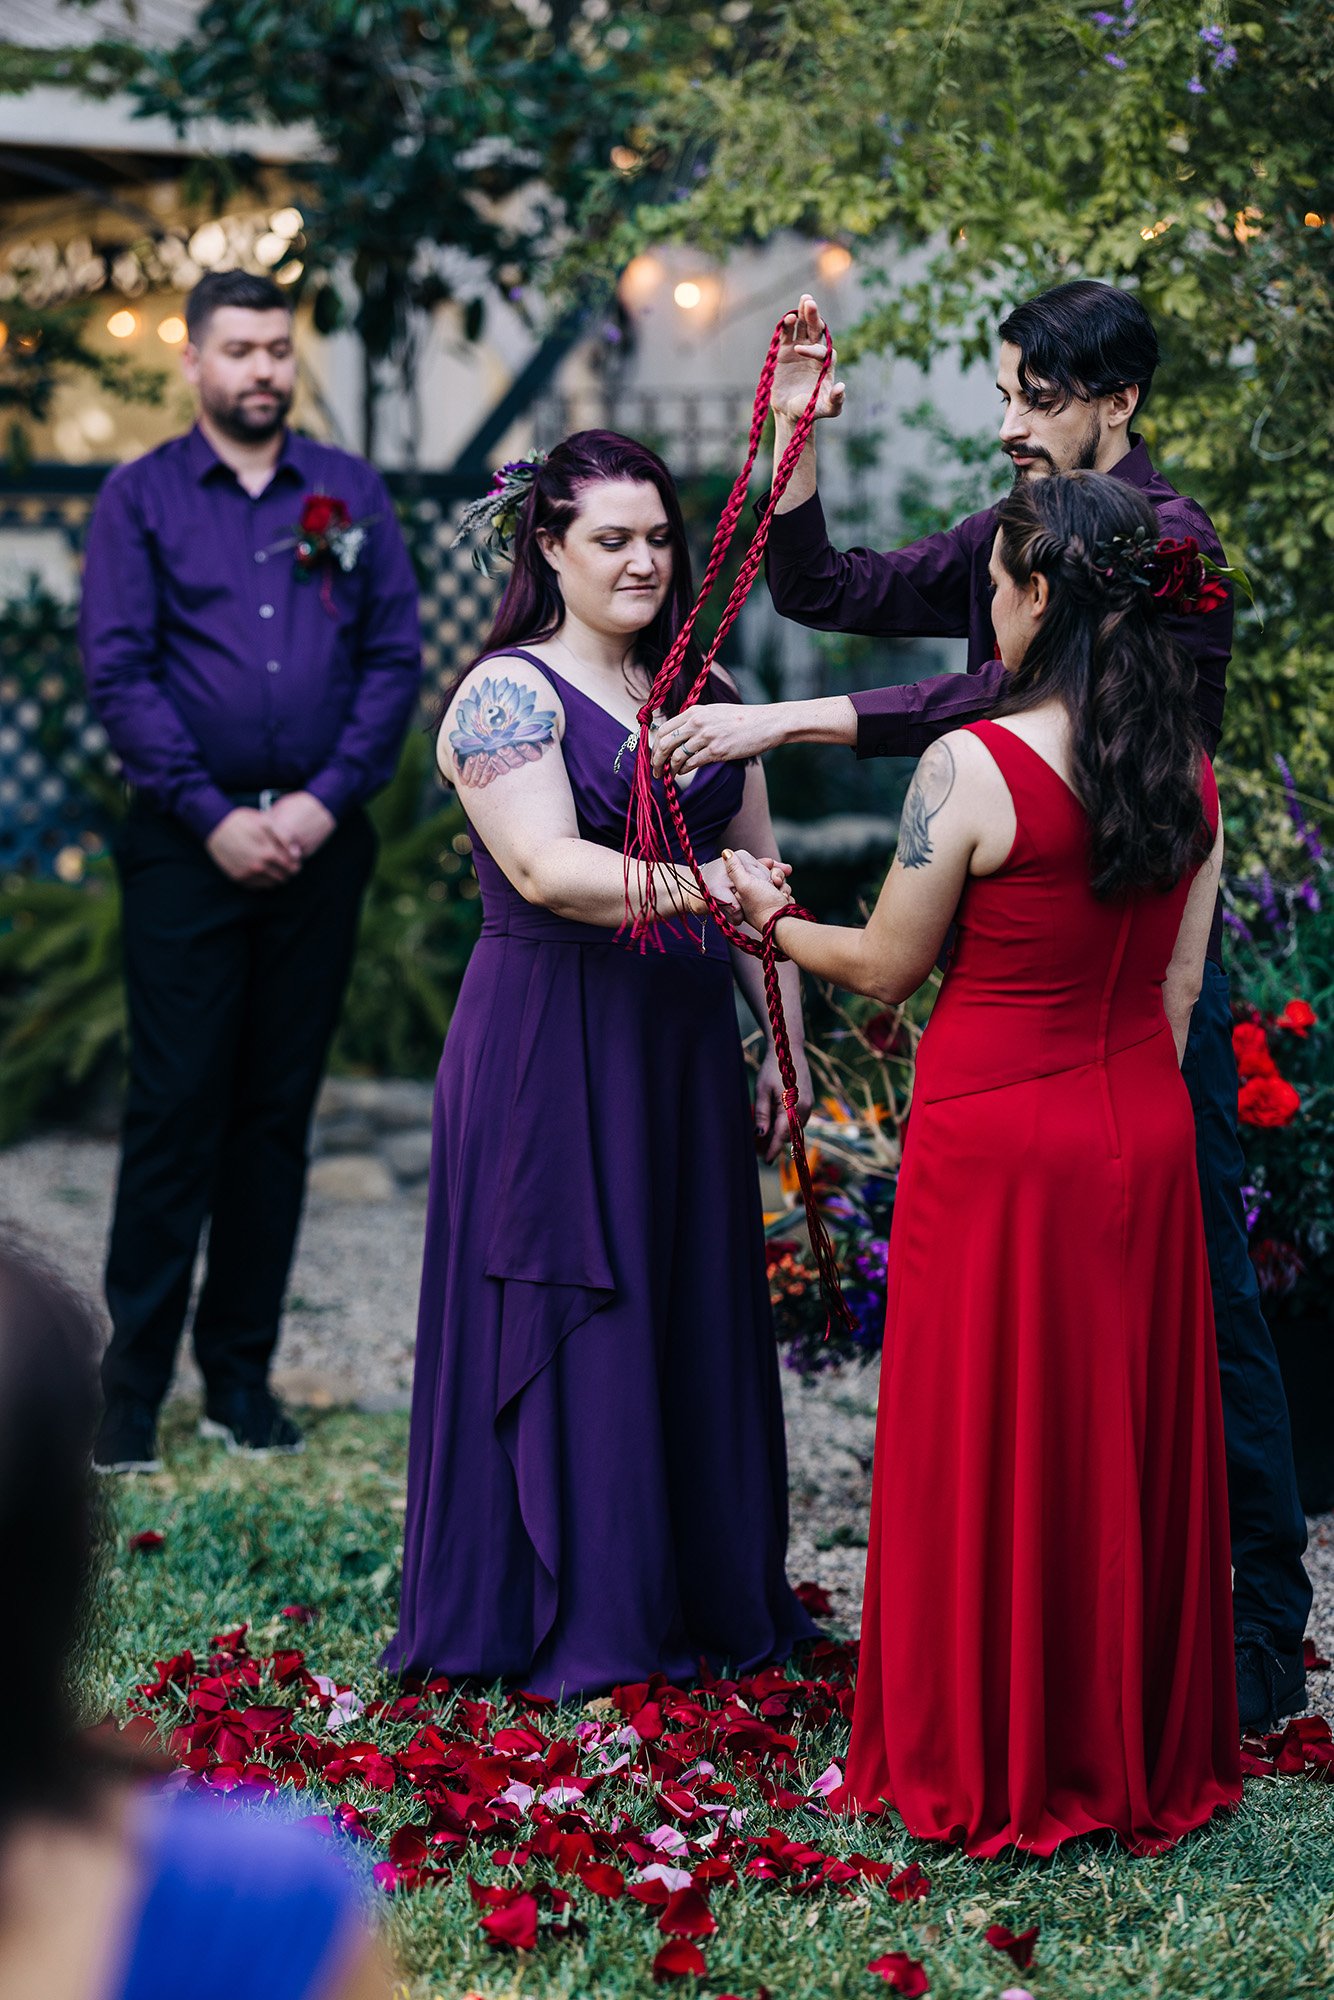 Heather and Veronica have a handfasting ceremony during their wedding in Ojai, California.